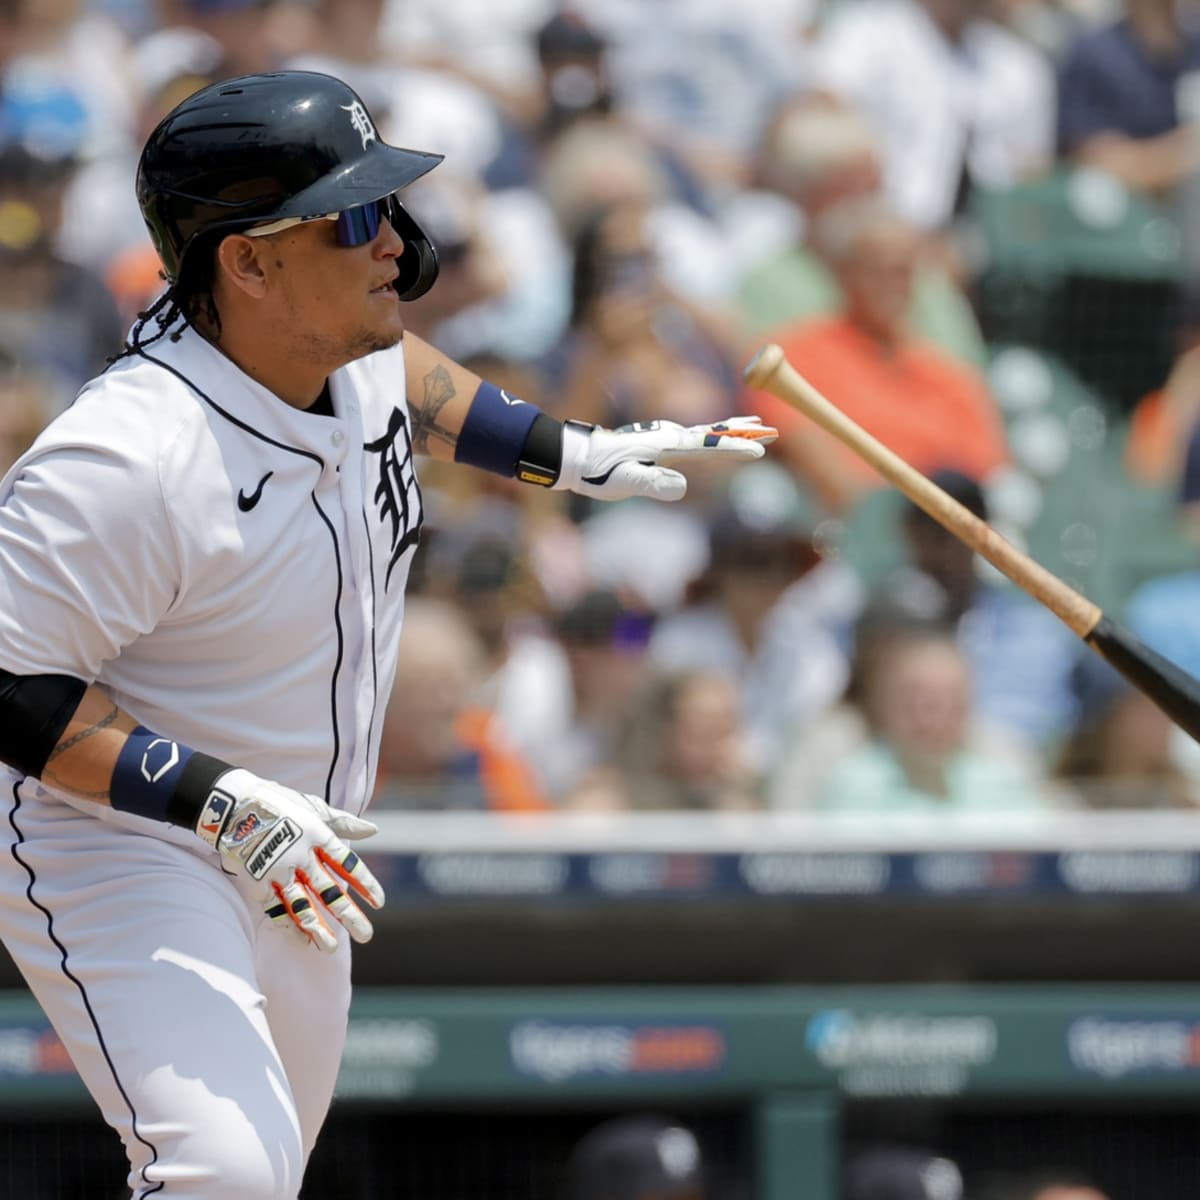 Greatest Venezuelan MLB Players: Is Miguel Cabrera the greatest